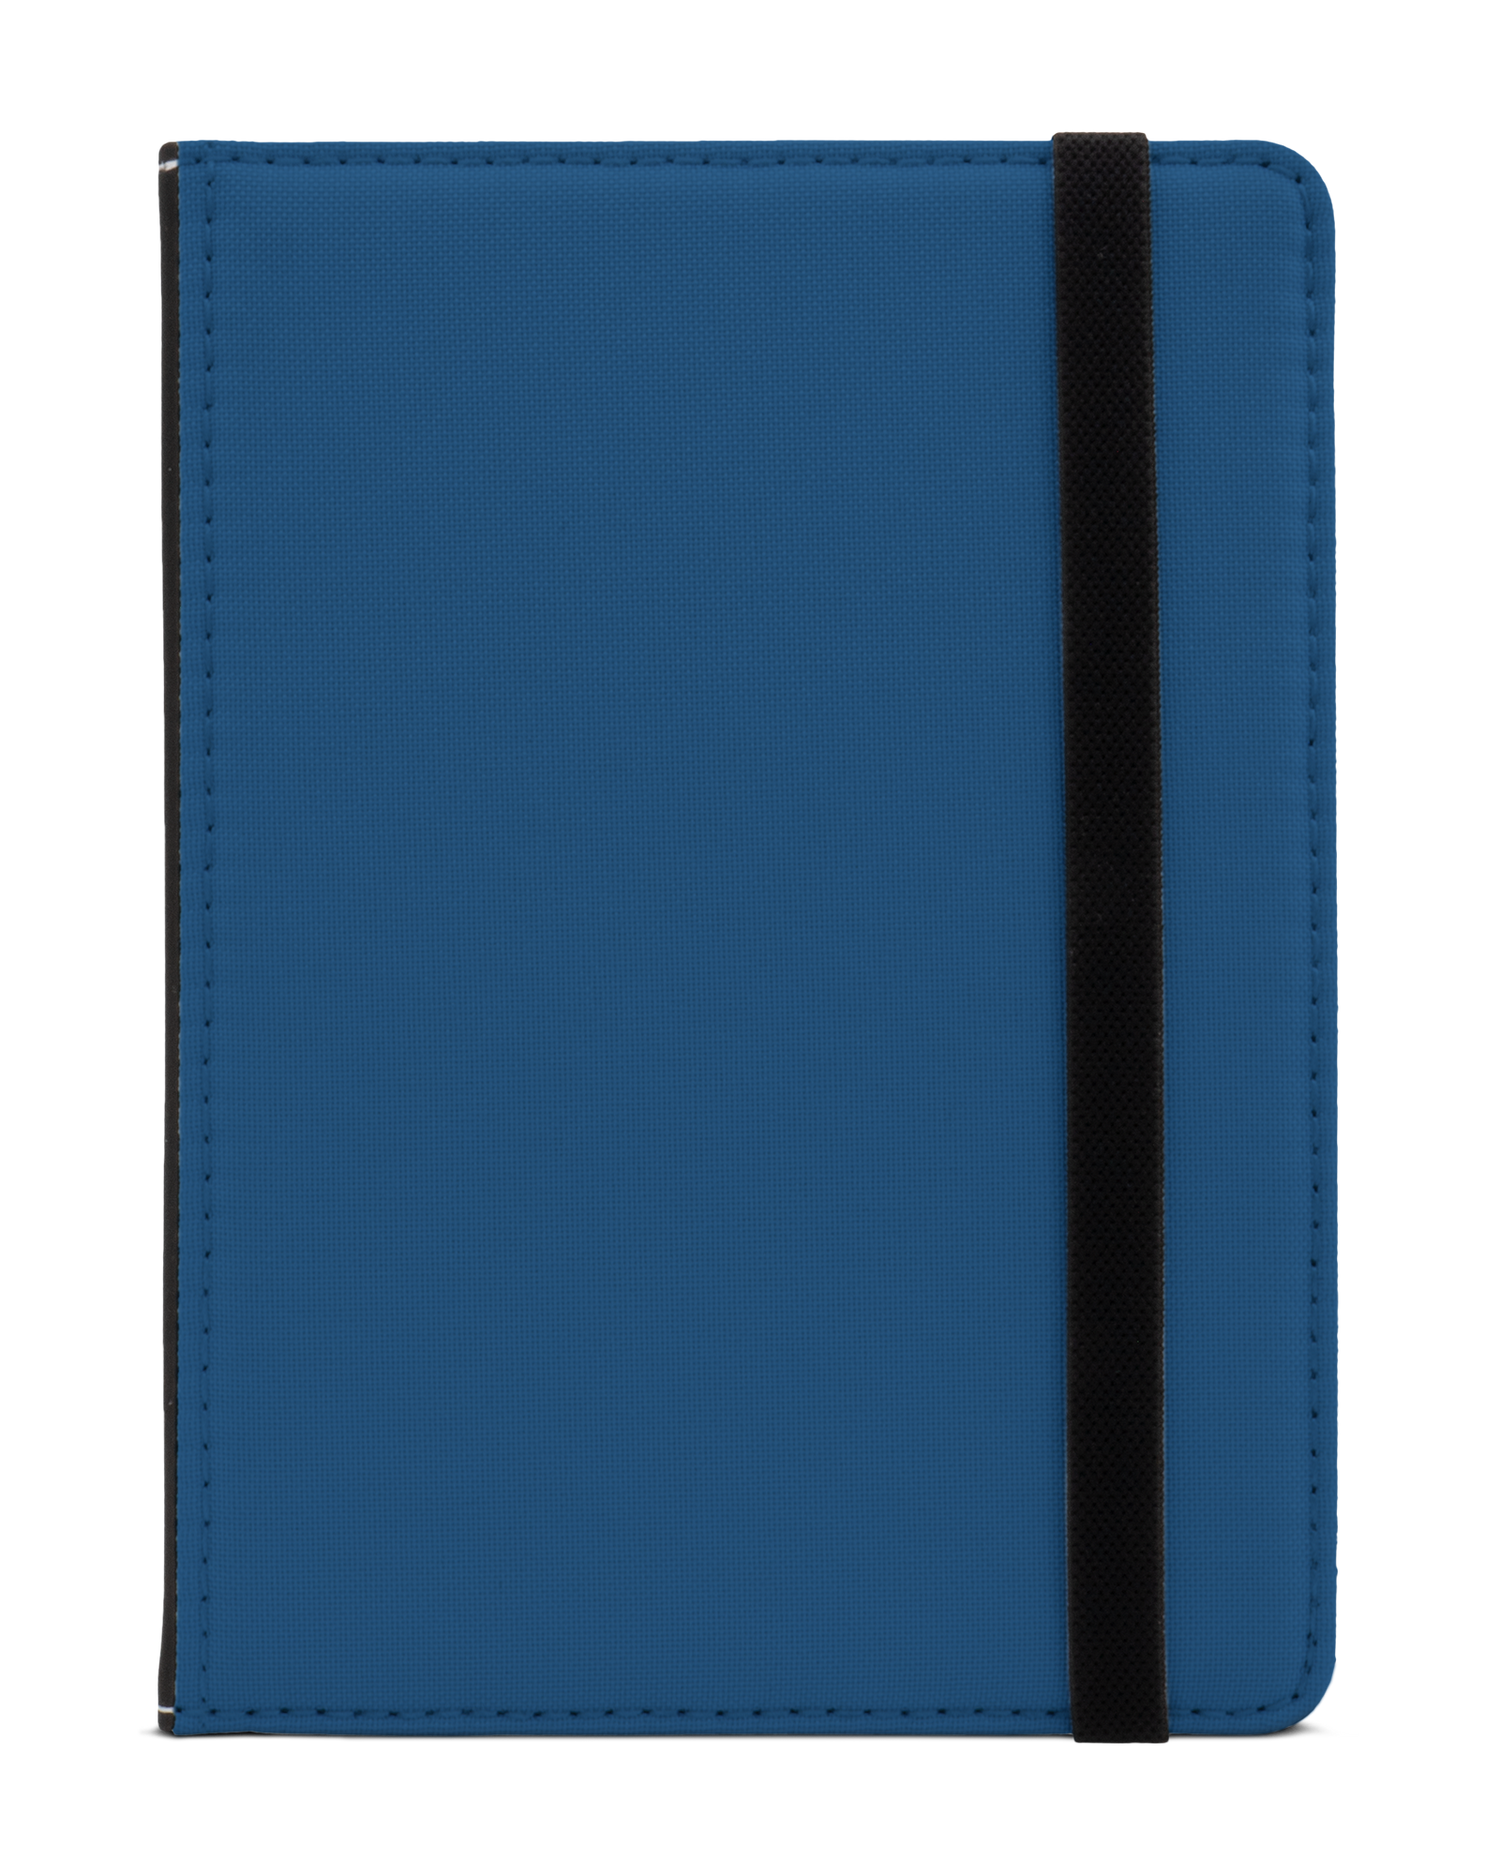 CLASSIC BLUE eBook Reader Hülle XS: Frontansicht